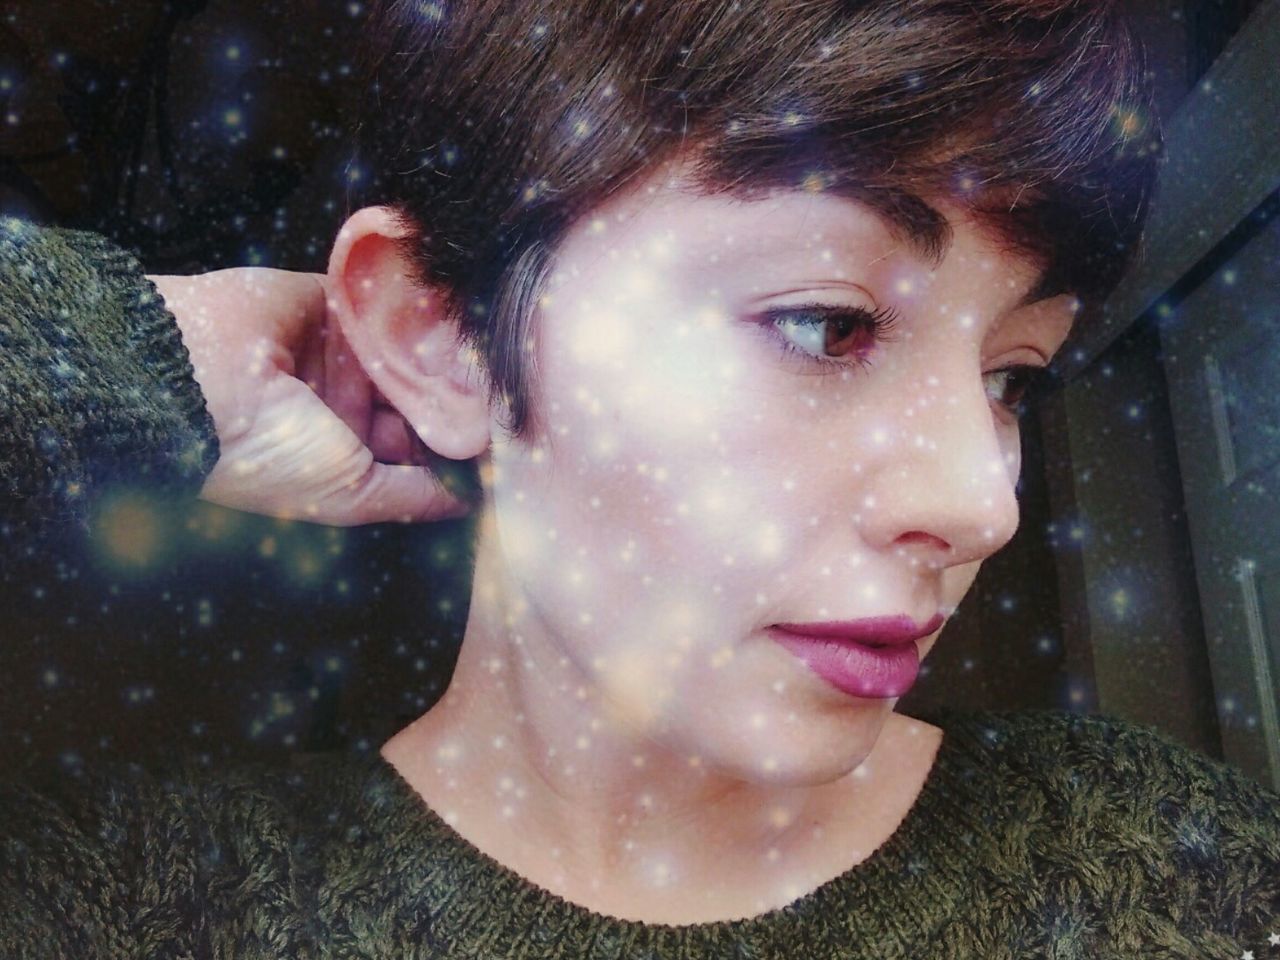 Digital composite image of woman and star field